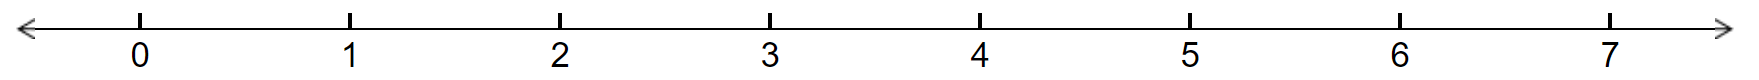 Depicts a number line that is from 0 to 7 and is increments of 1. 